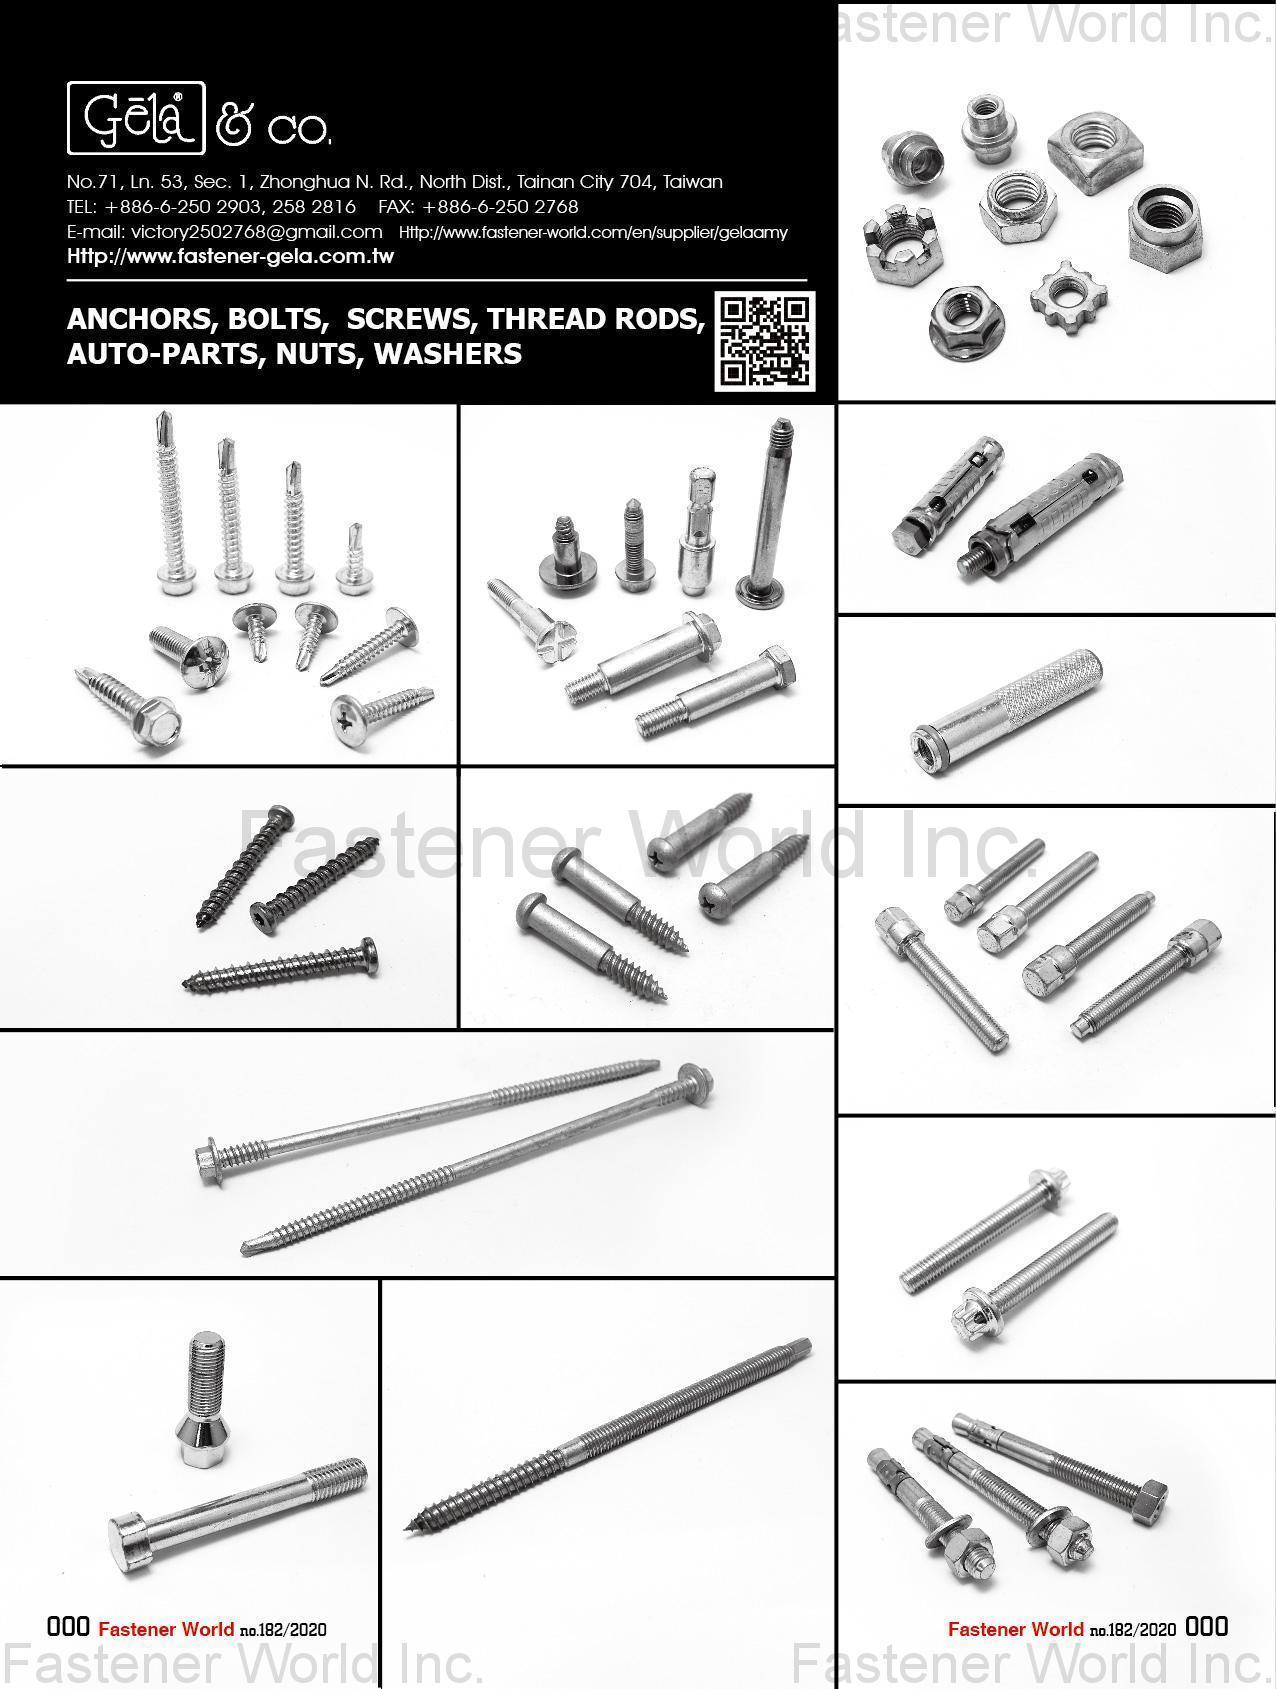 GELA & COMPANY  , Anchors, Bolts, Screws, Thread Rods, Auto-Parts, Nuts, Washers